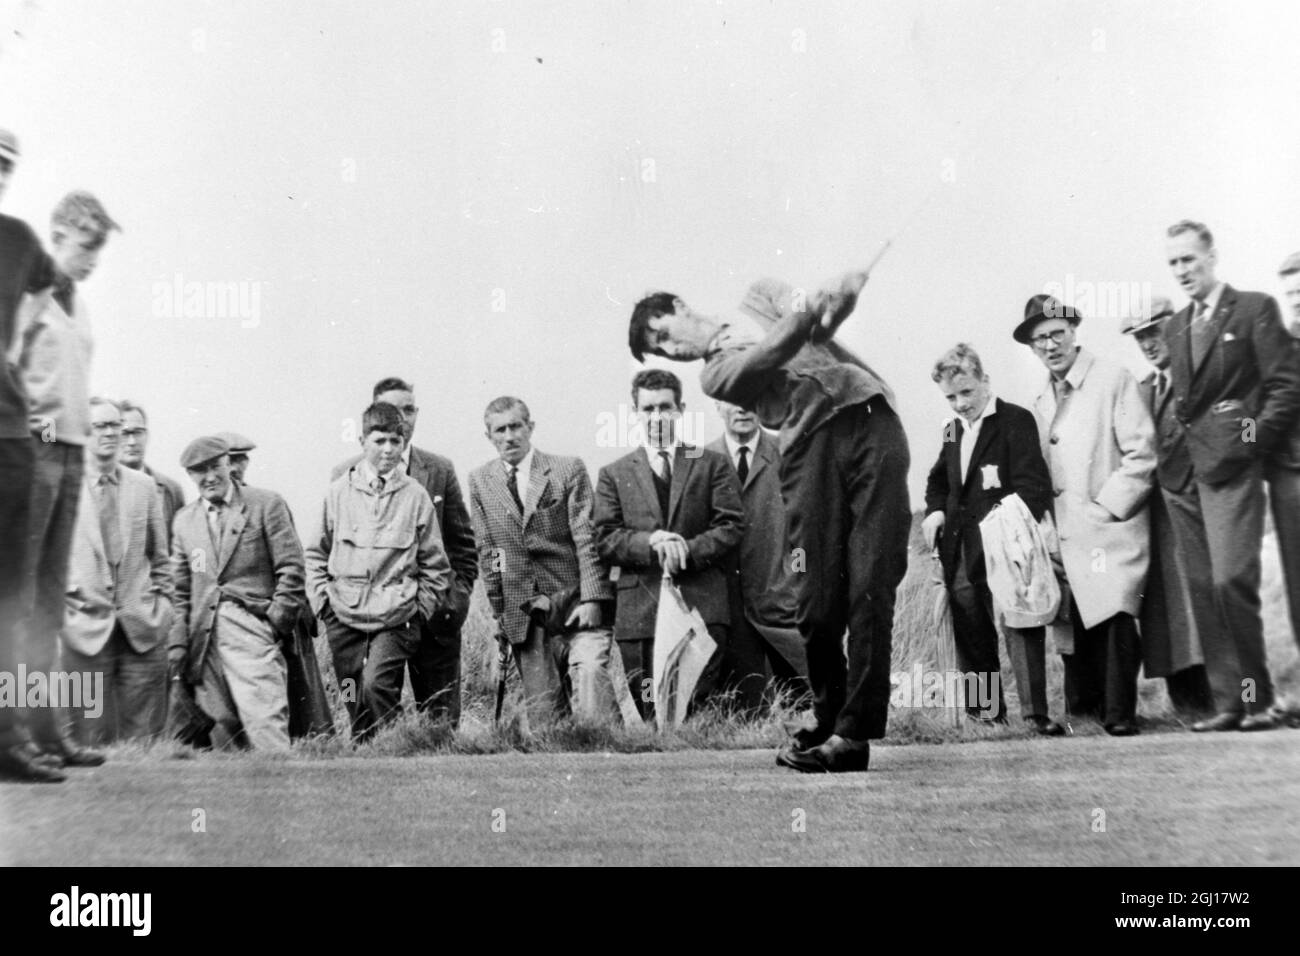 GOLF ALEX SOUTAR WINS IN PRESTWICK, SCOTLAND - PLAYS OFF THE TEE ; 26 AUGUST 1963 Stock Photo